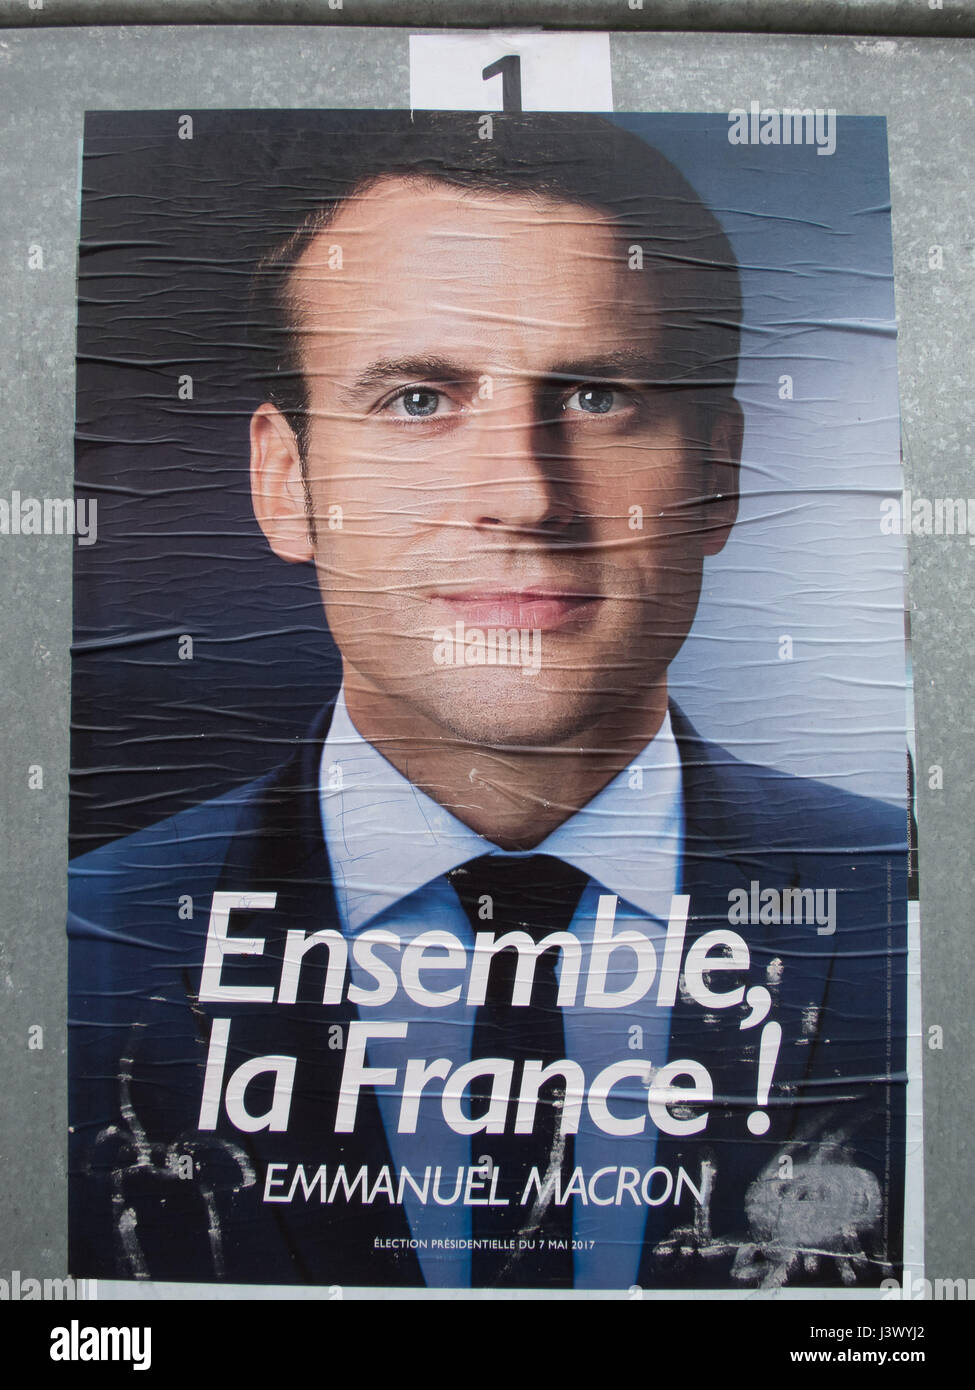 Presidential elections in France, 2017, Emmanuel Macron 65.5% wins French presidential election, defeating Marine le Pen 34.5%, polling booth. Credit: Ania Freindorf/Alamy Live News Stock Photo